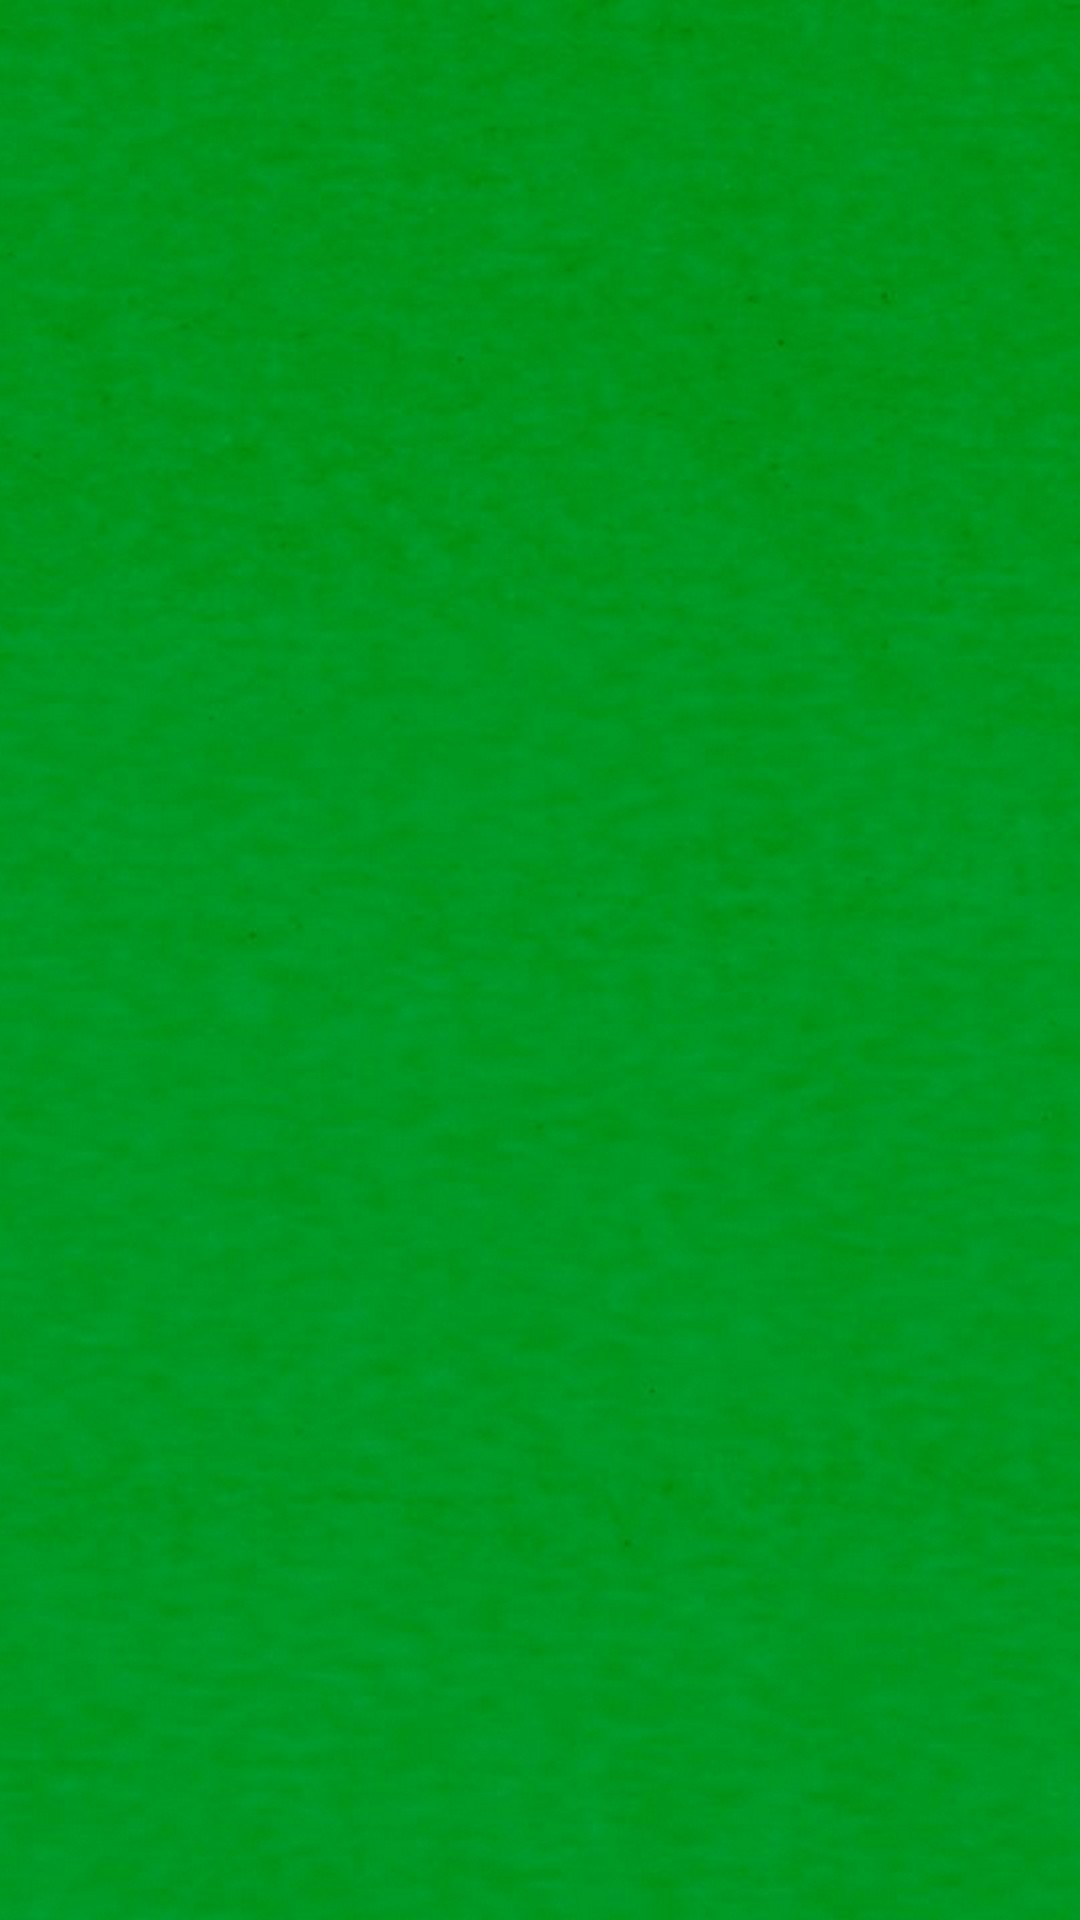 Wallpaper Green Android with resolution 1080X1920 pixel. You can make this wallpaper for your Android backgrounds, Tablet, Smartphones Screensavers and Mobile Phone Lock Screen